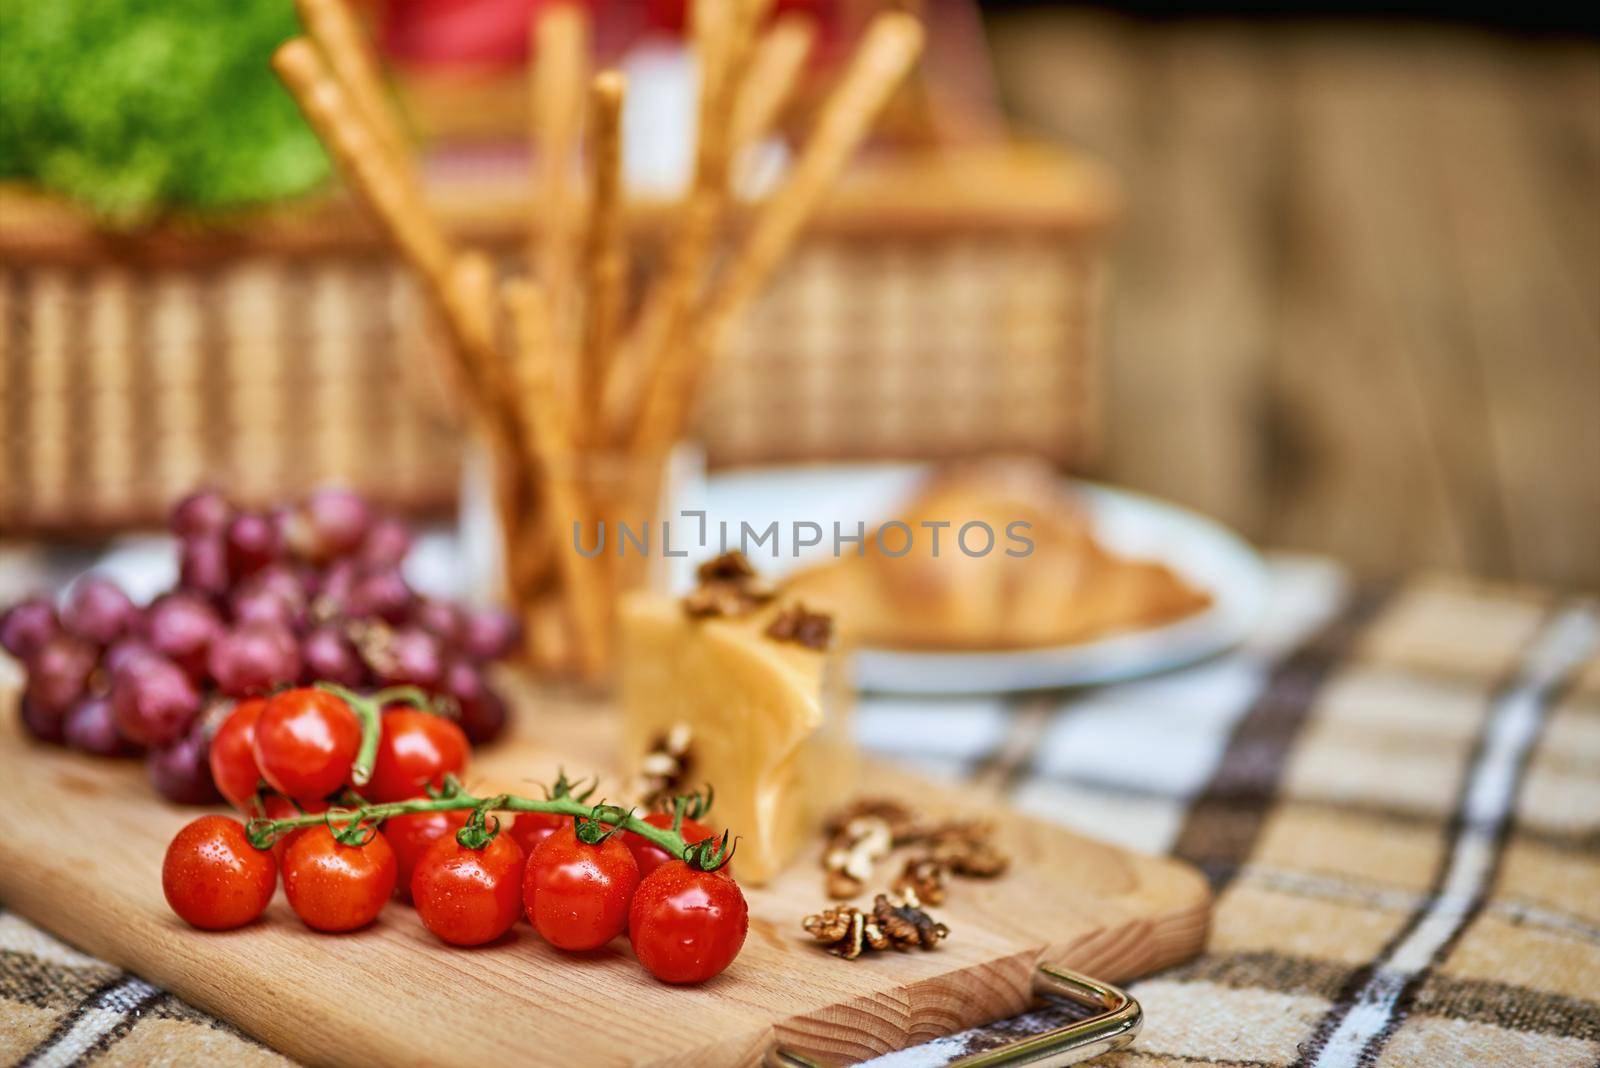 Tomatoes, grapes and cheese on a cutting wooden board on checkered plaid with a wicker basket on the background. Rest and vacation lifestyle concept